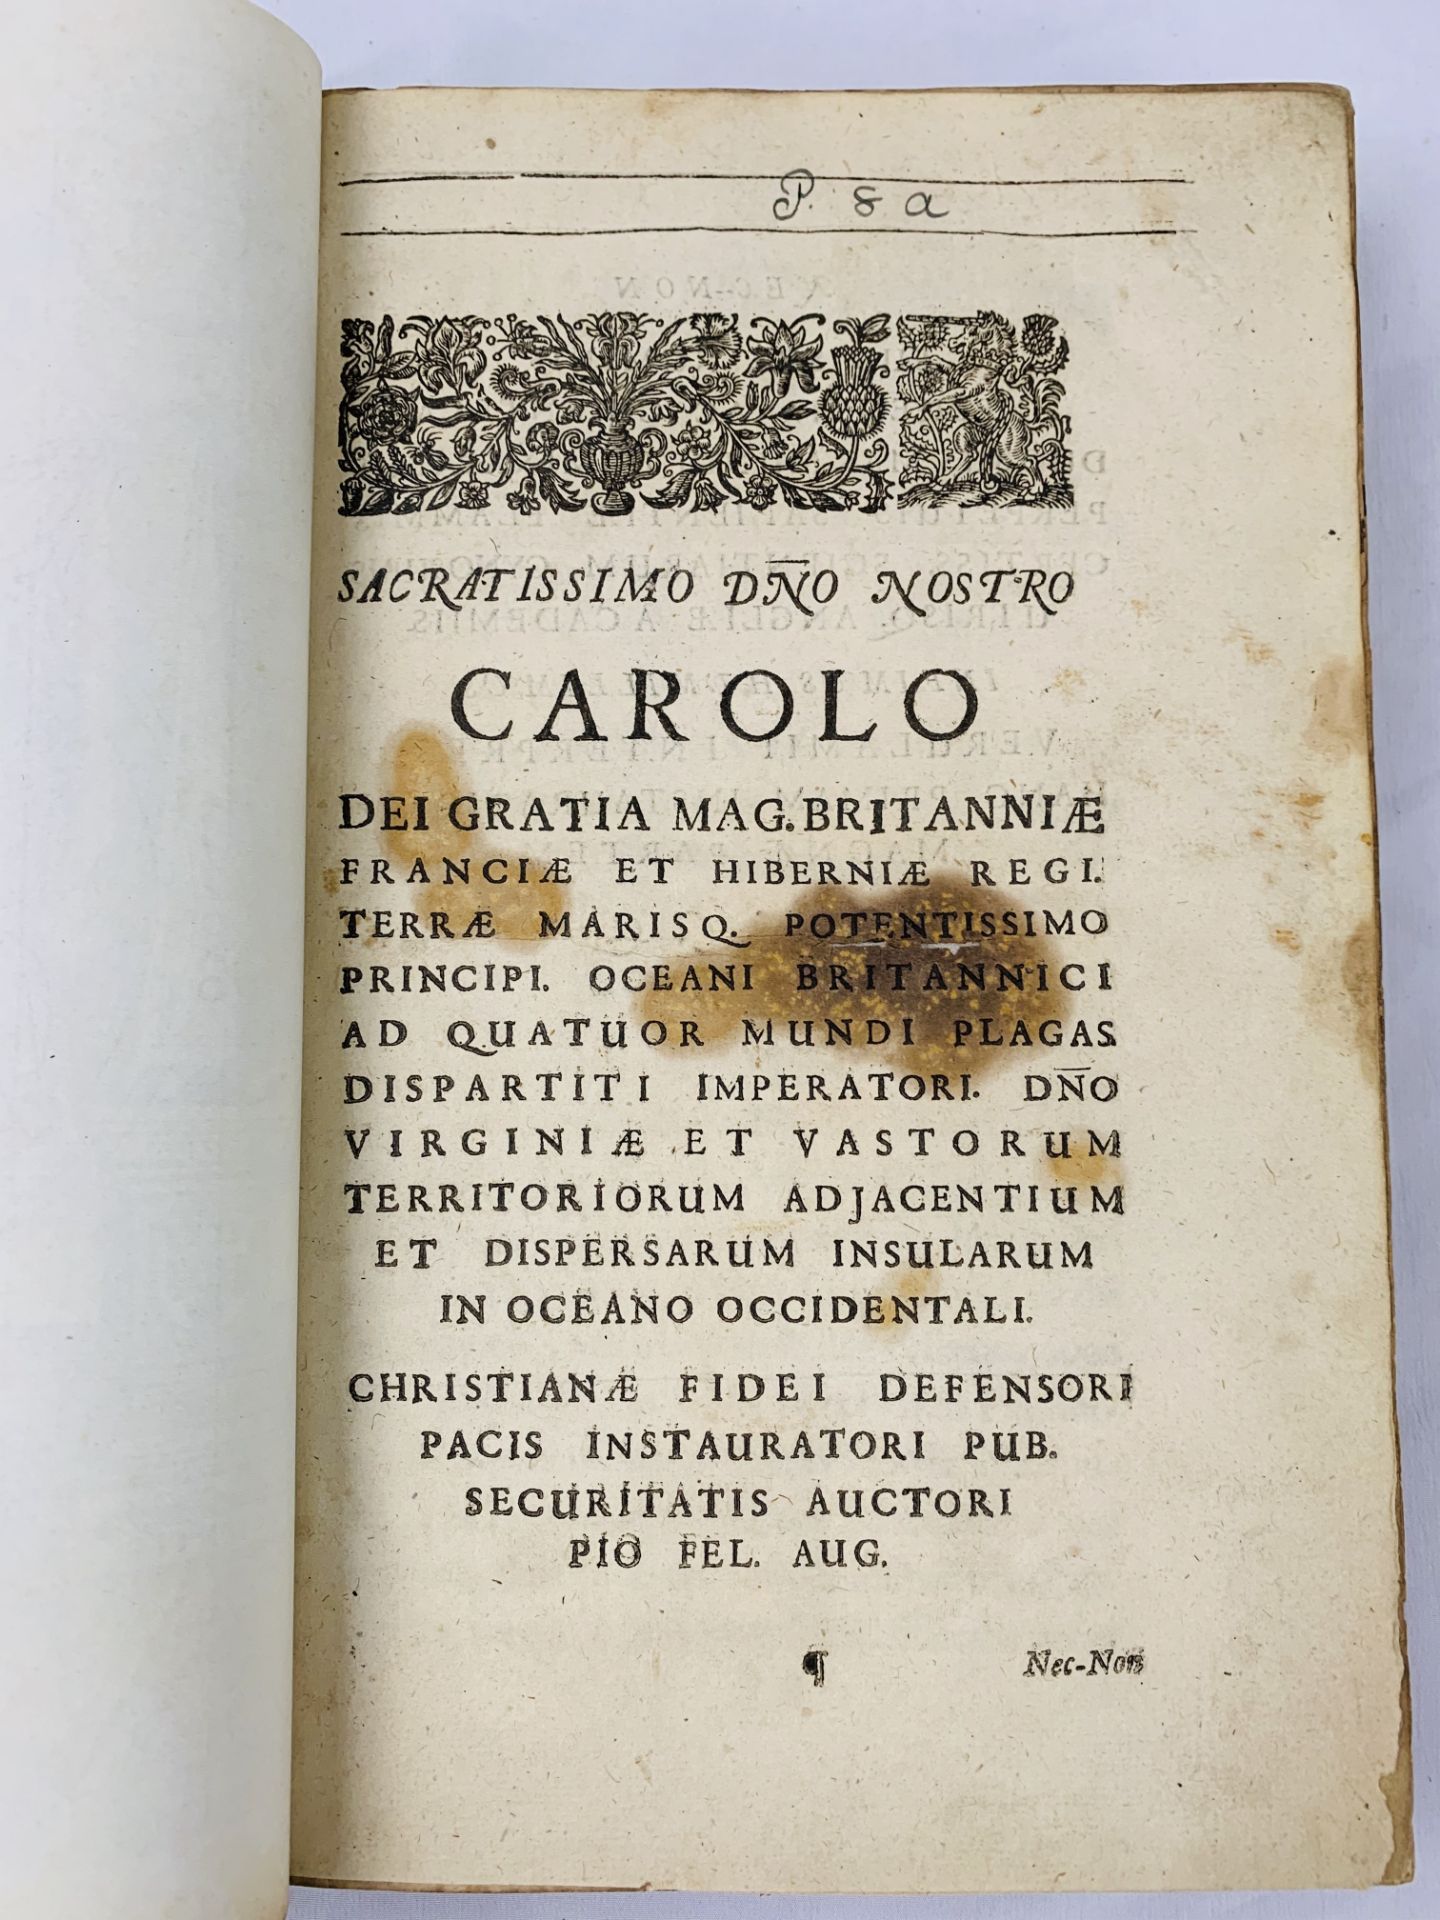 Poetical Works (text in Latin), two volumes, published Amsterdam 1727, author Ovid. - Image 3 of 7